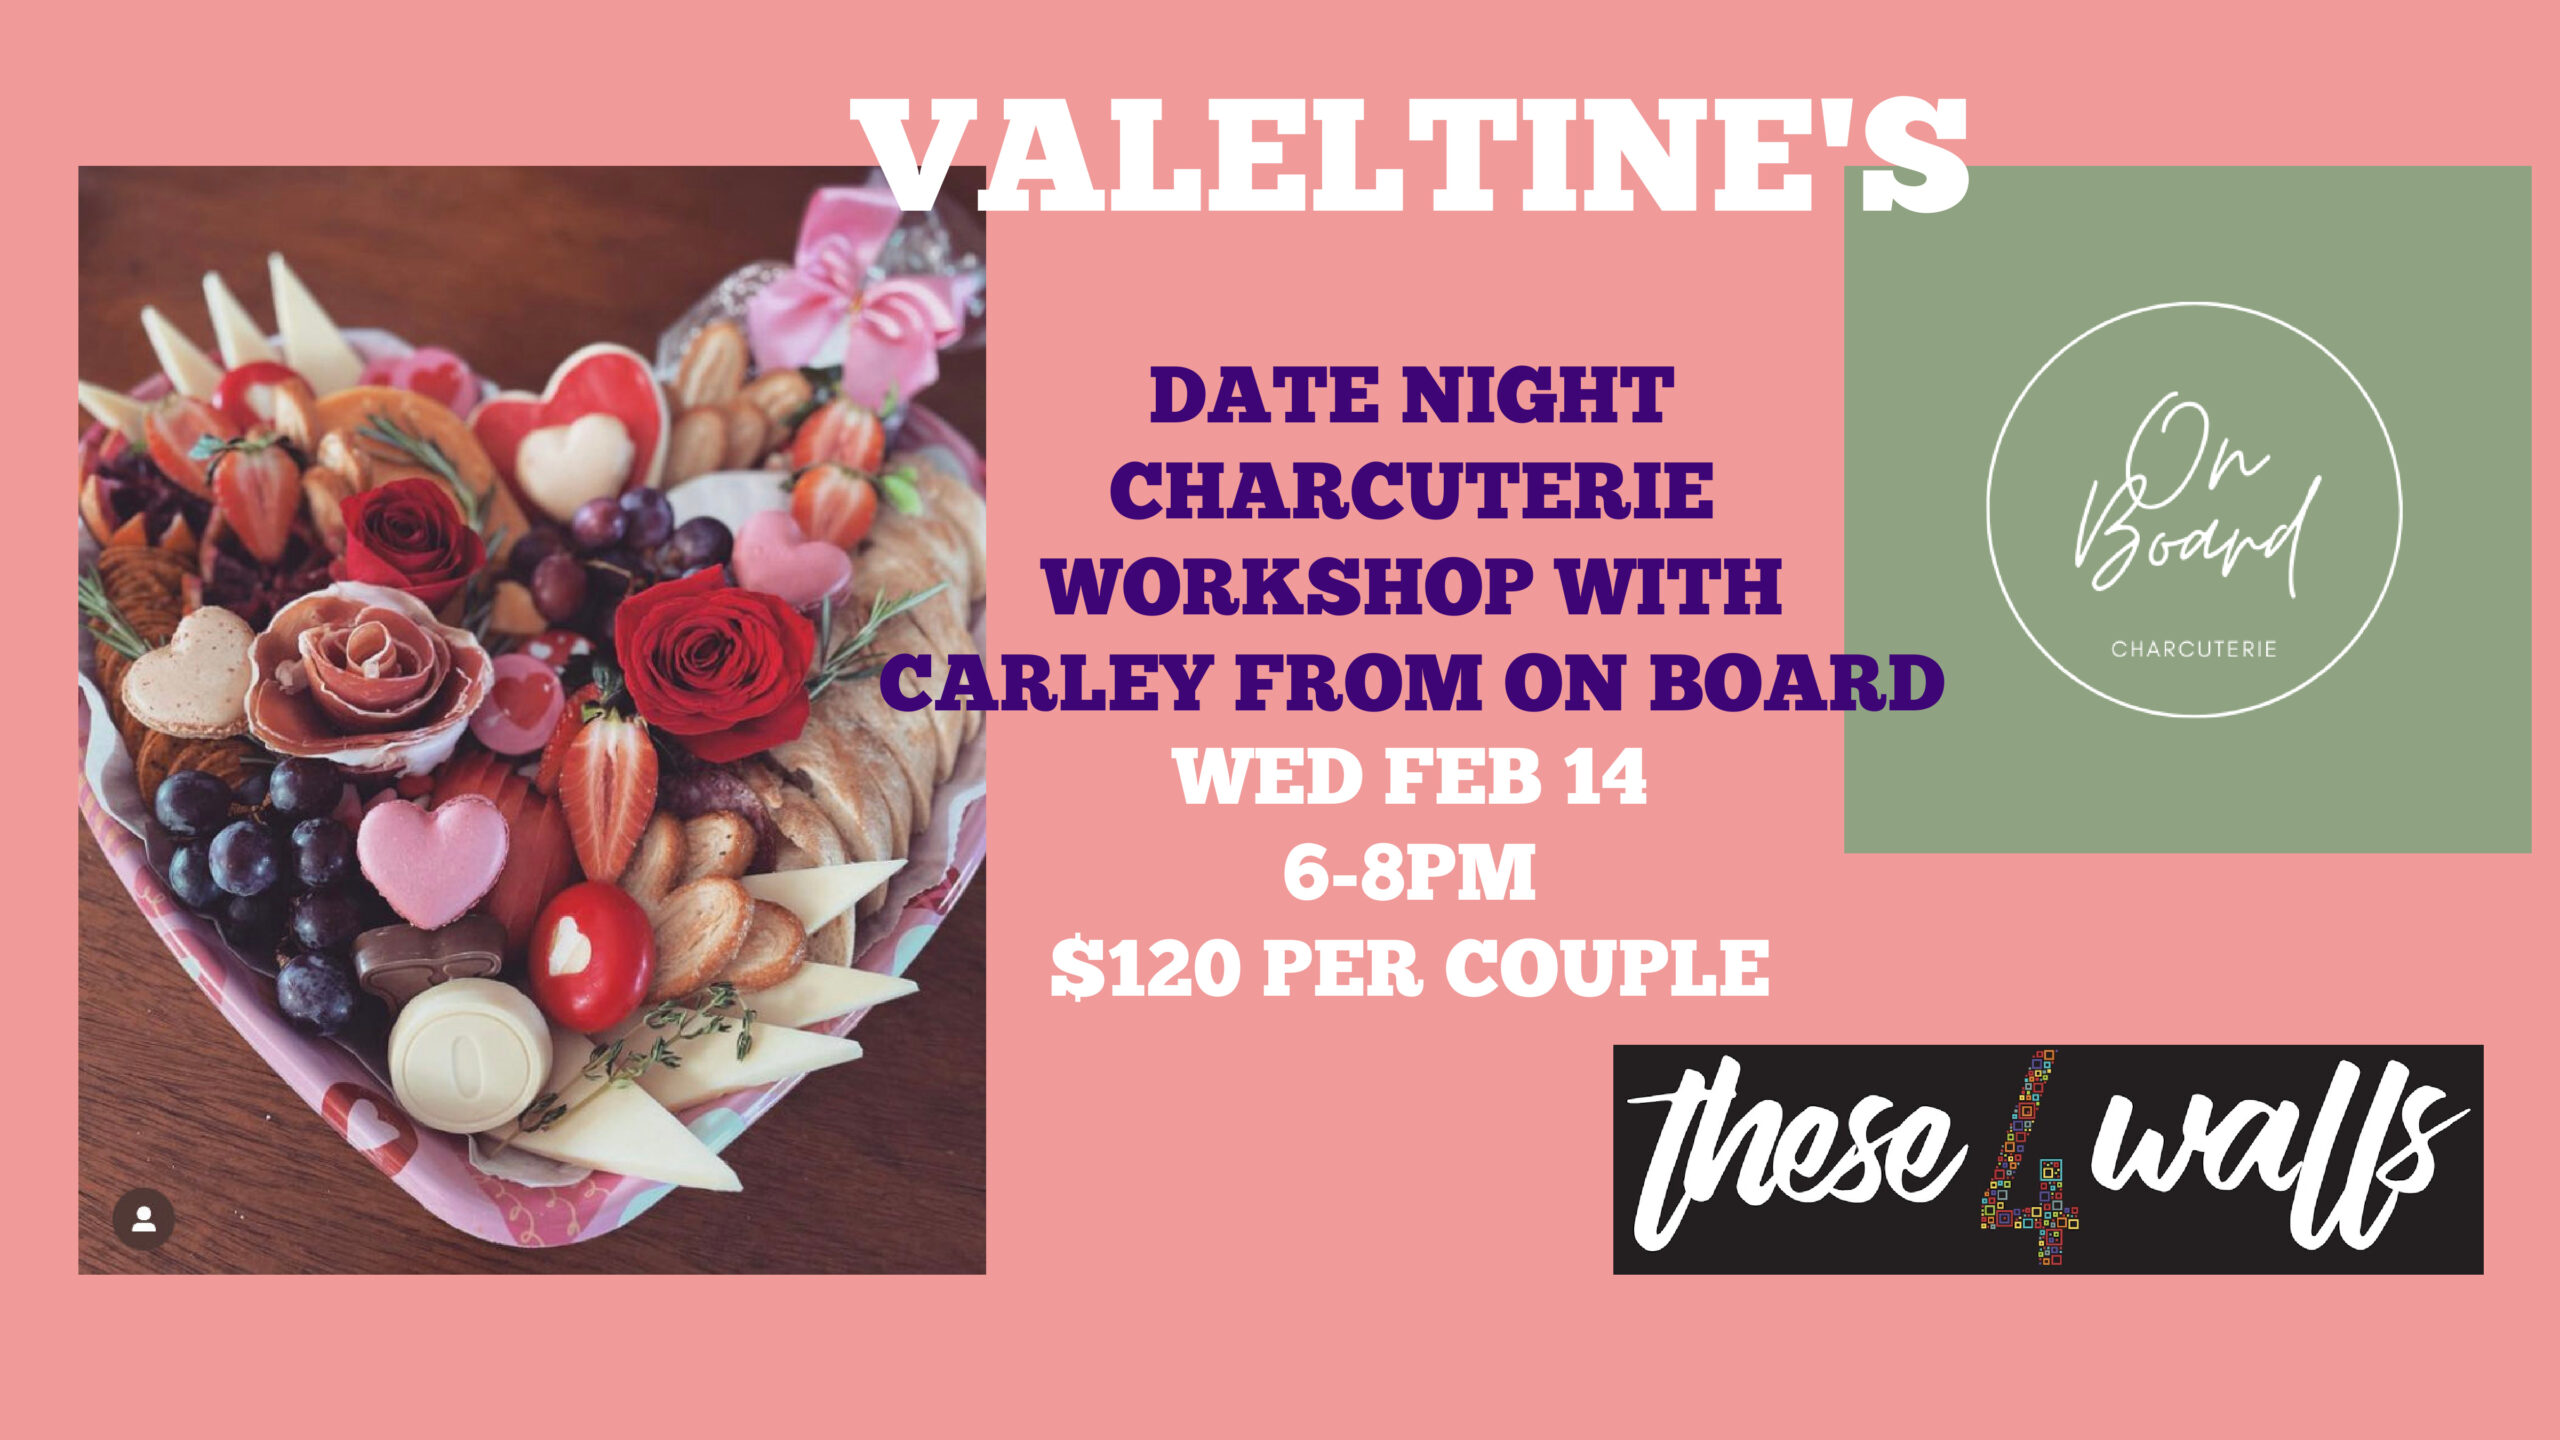 event poster reading "Valentine's". Has a picture of a charcuterie board.